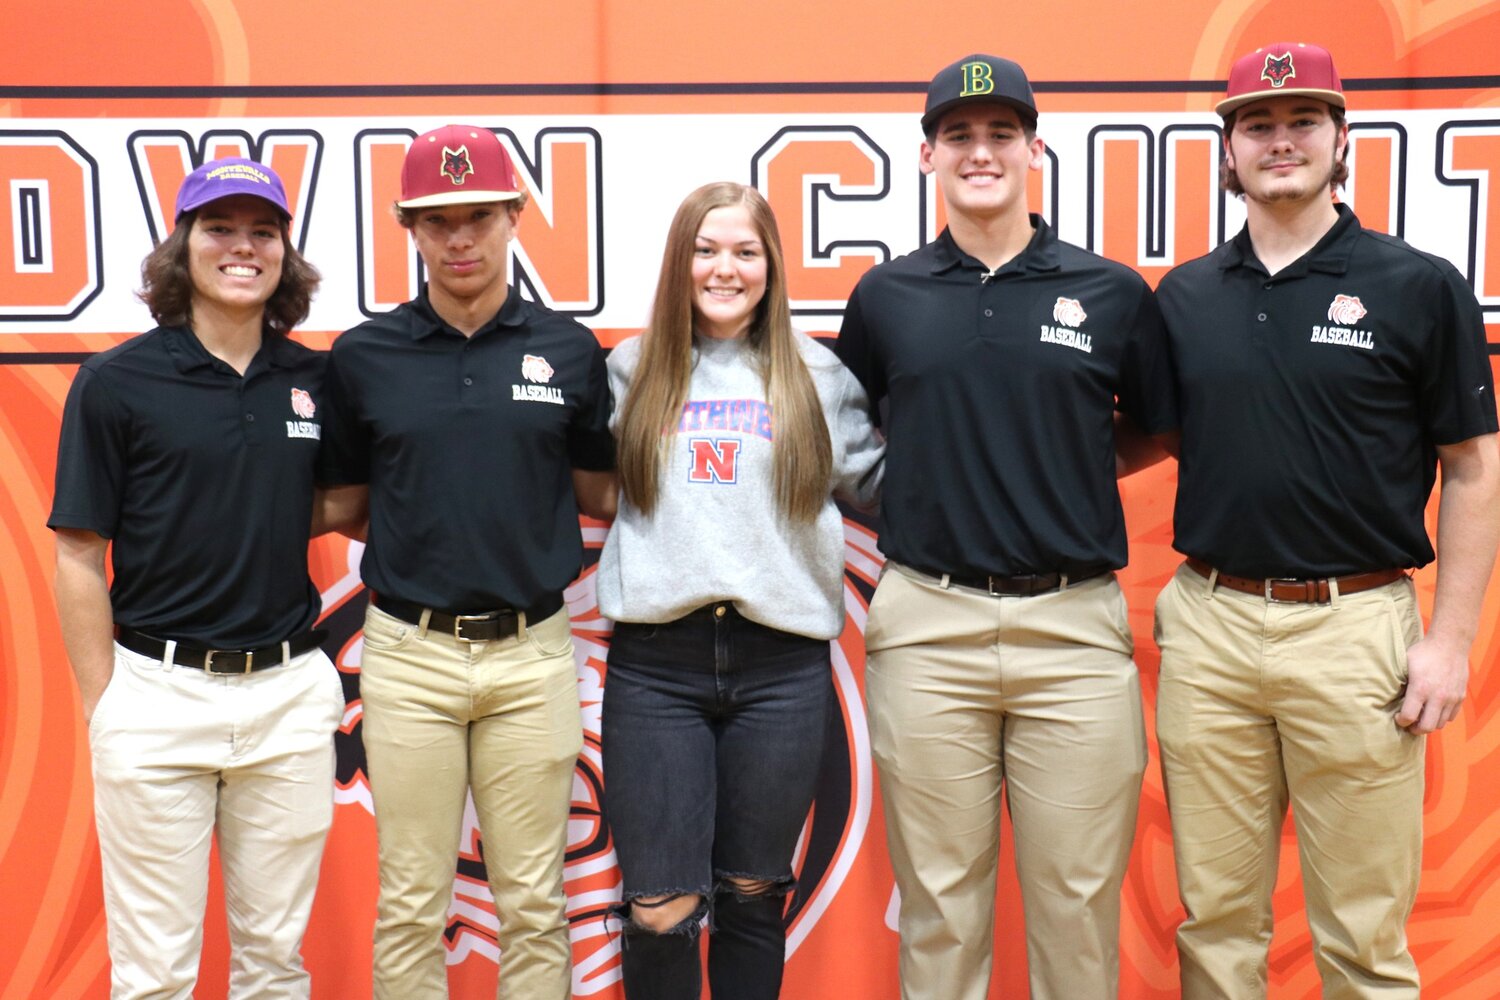 Baldwin County High School hosted a signing ceremony on Wednesday, Dec. 6, where four baseball players and one volleyball player inked college commitments. Pictured from the left are Landon Walker, Quincy Walters, Saylor Bryant, Jaxon Schuler and Eli Woody.